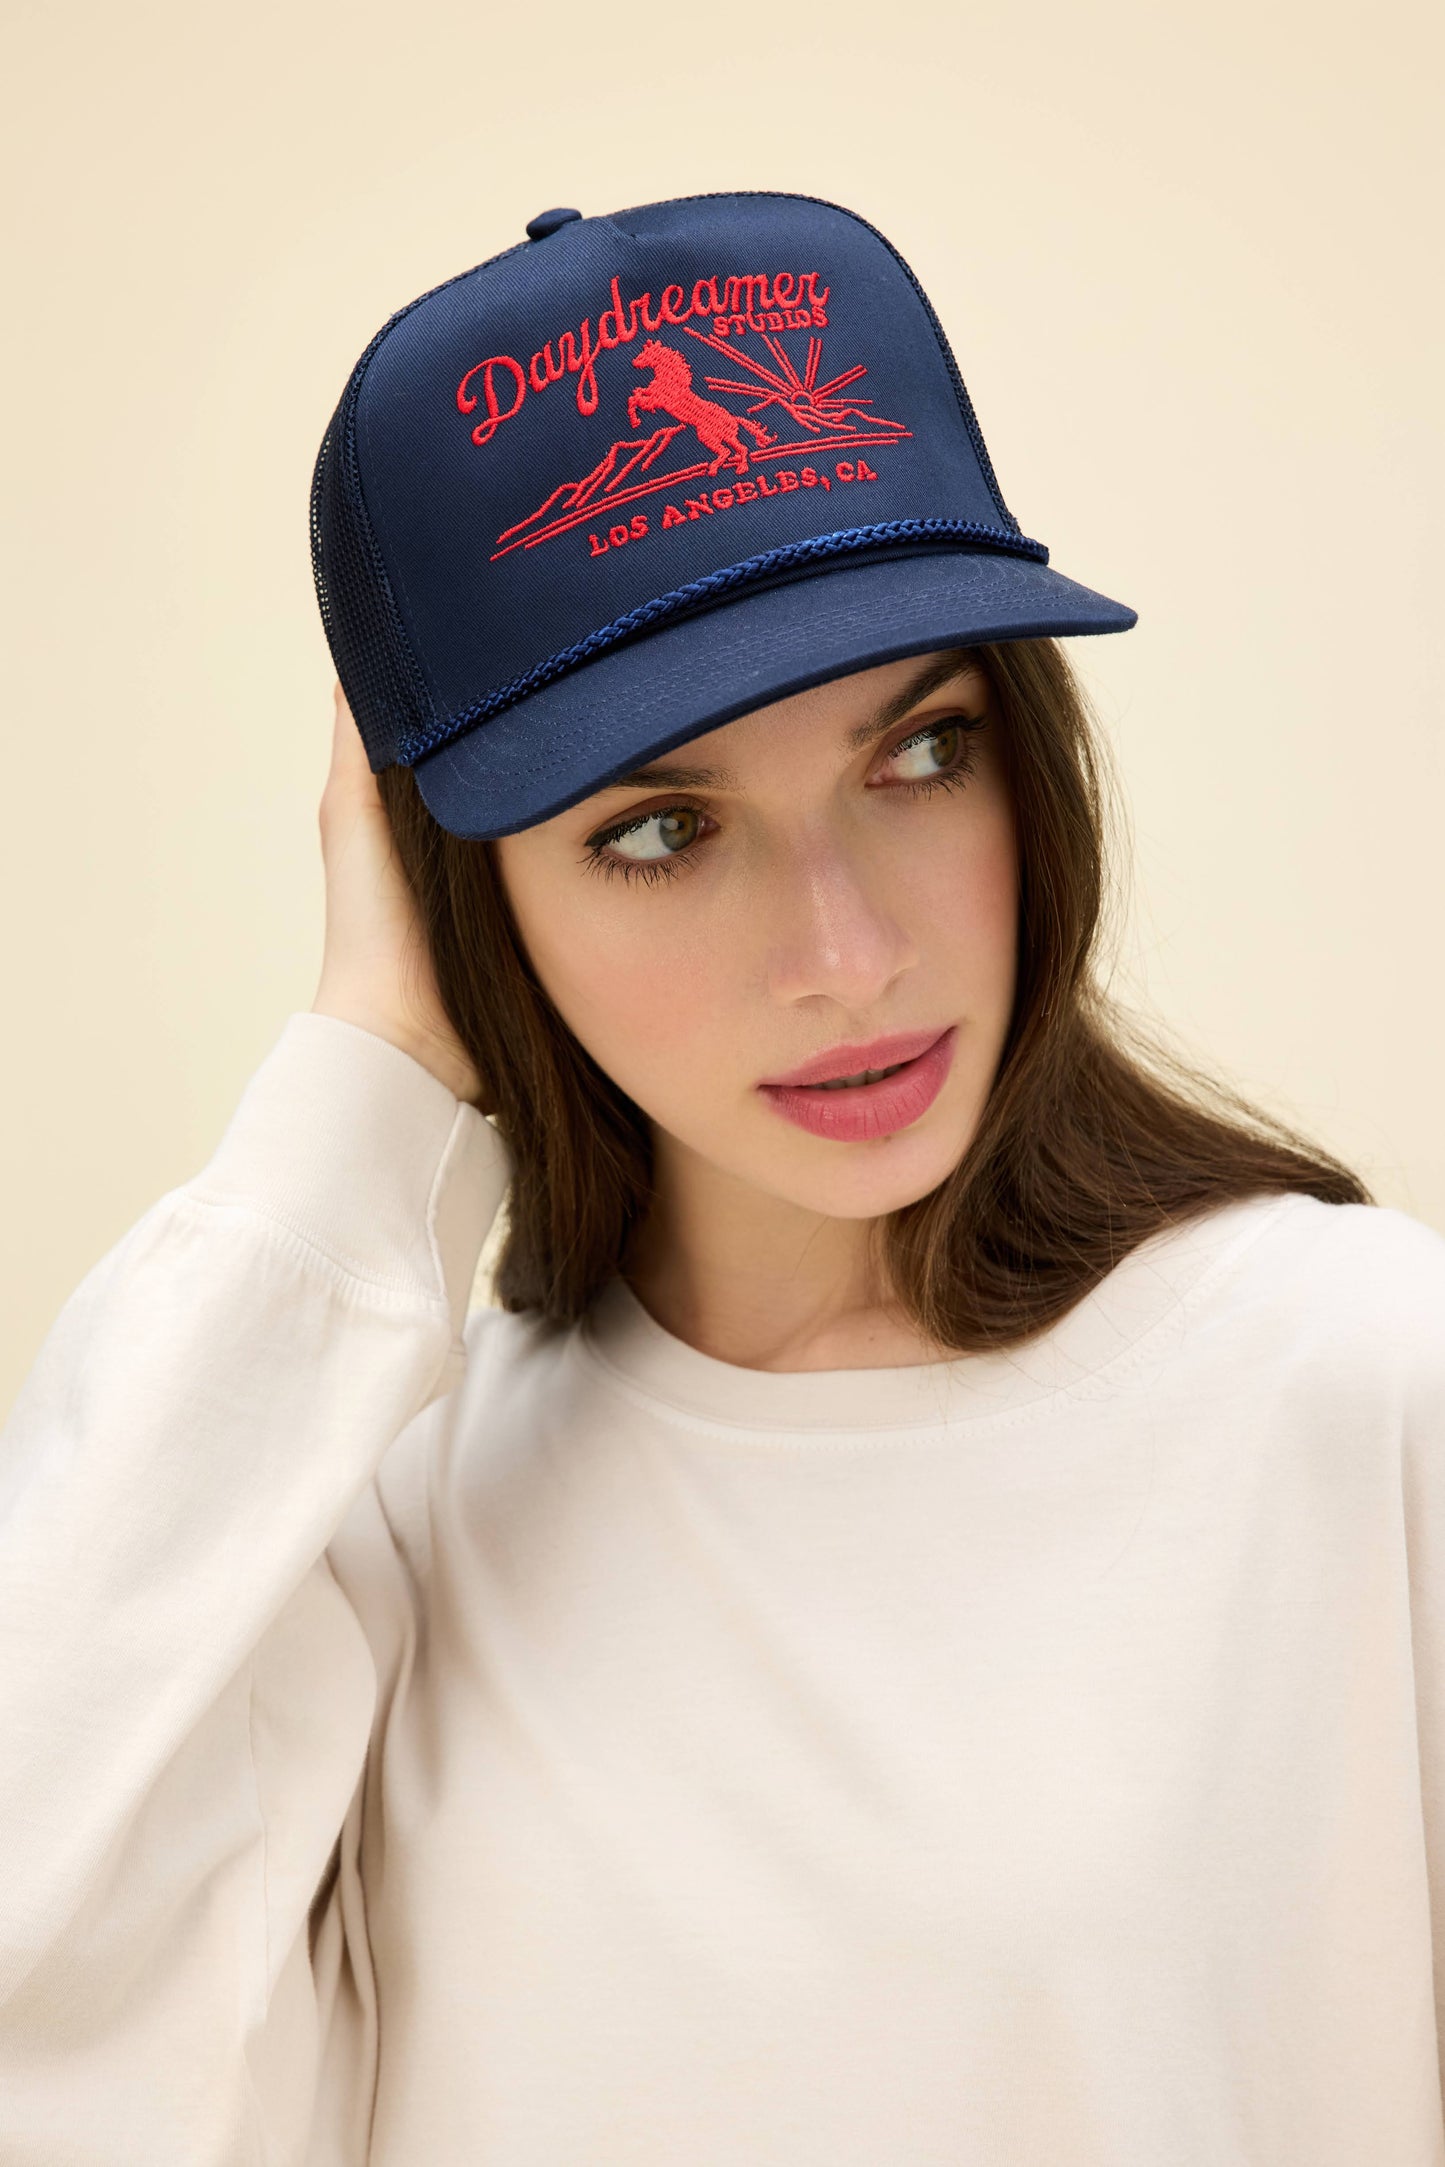 Model wearing a navy blue trucker hat with western-style 'Daydreamer Studios' embroidery on the front.